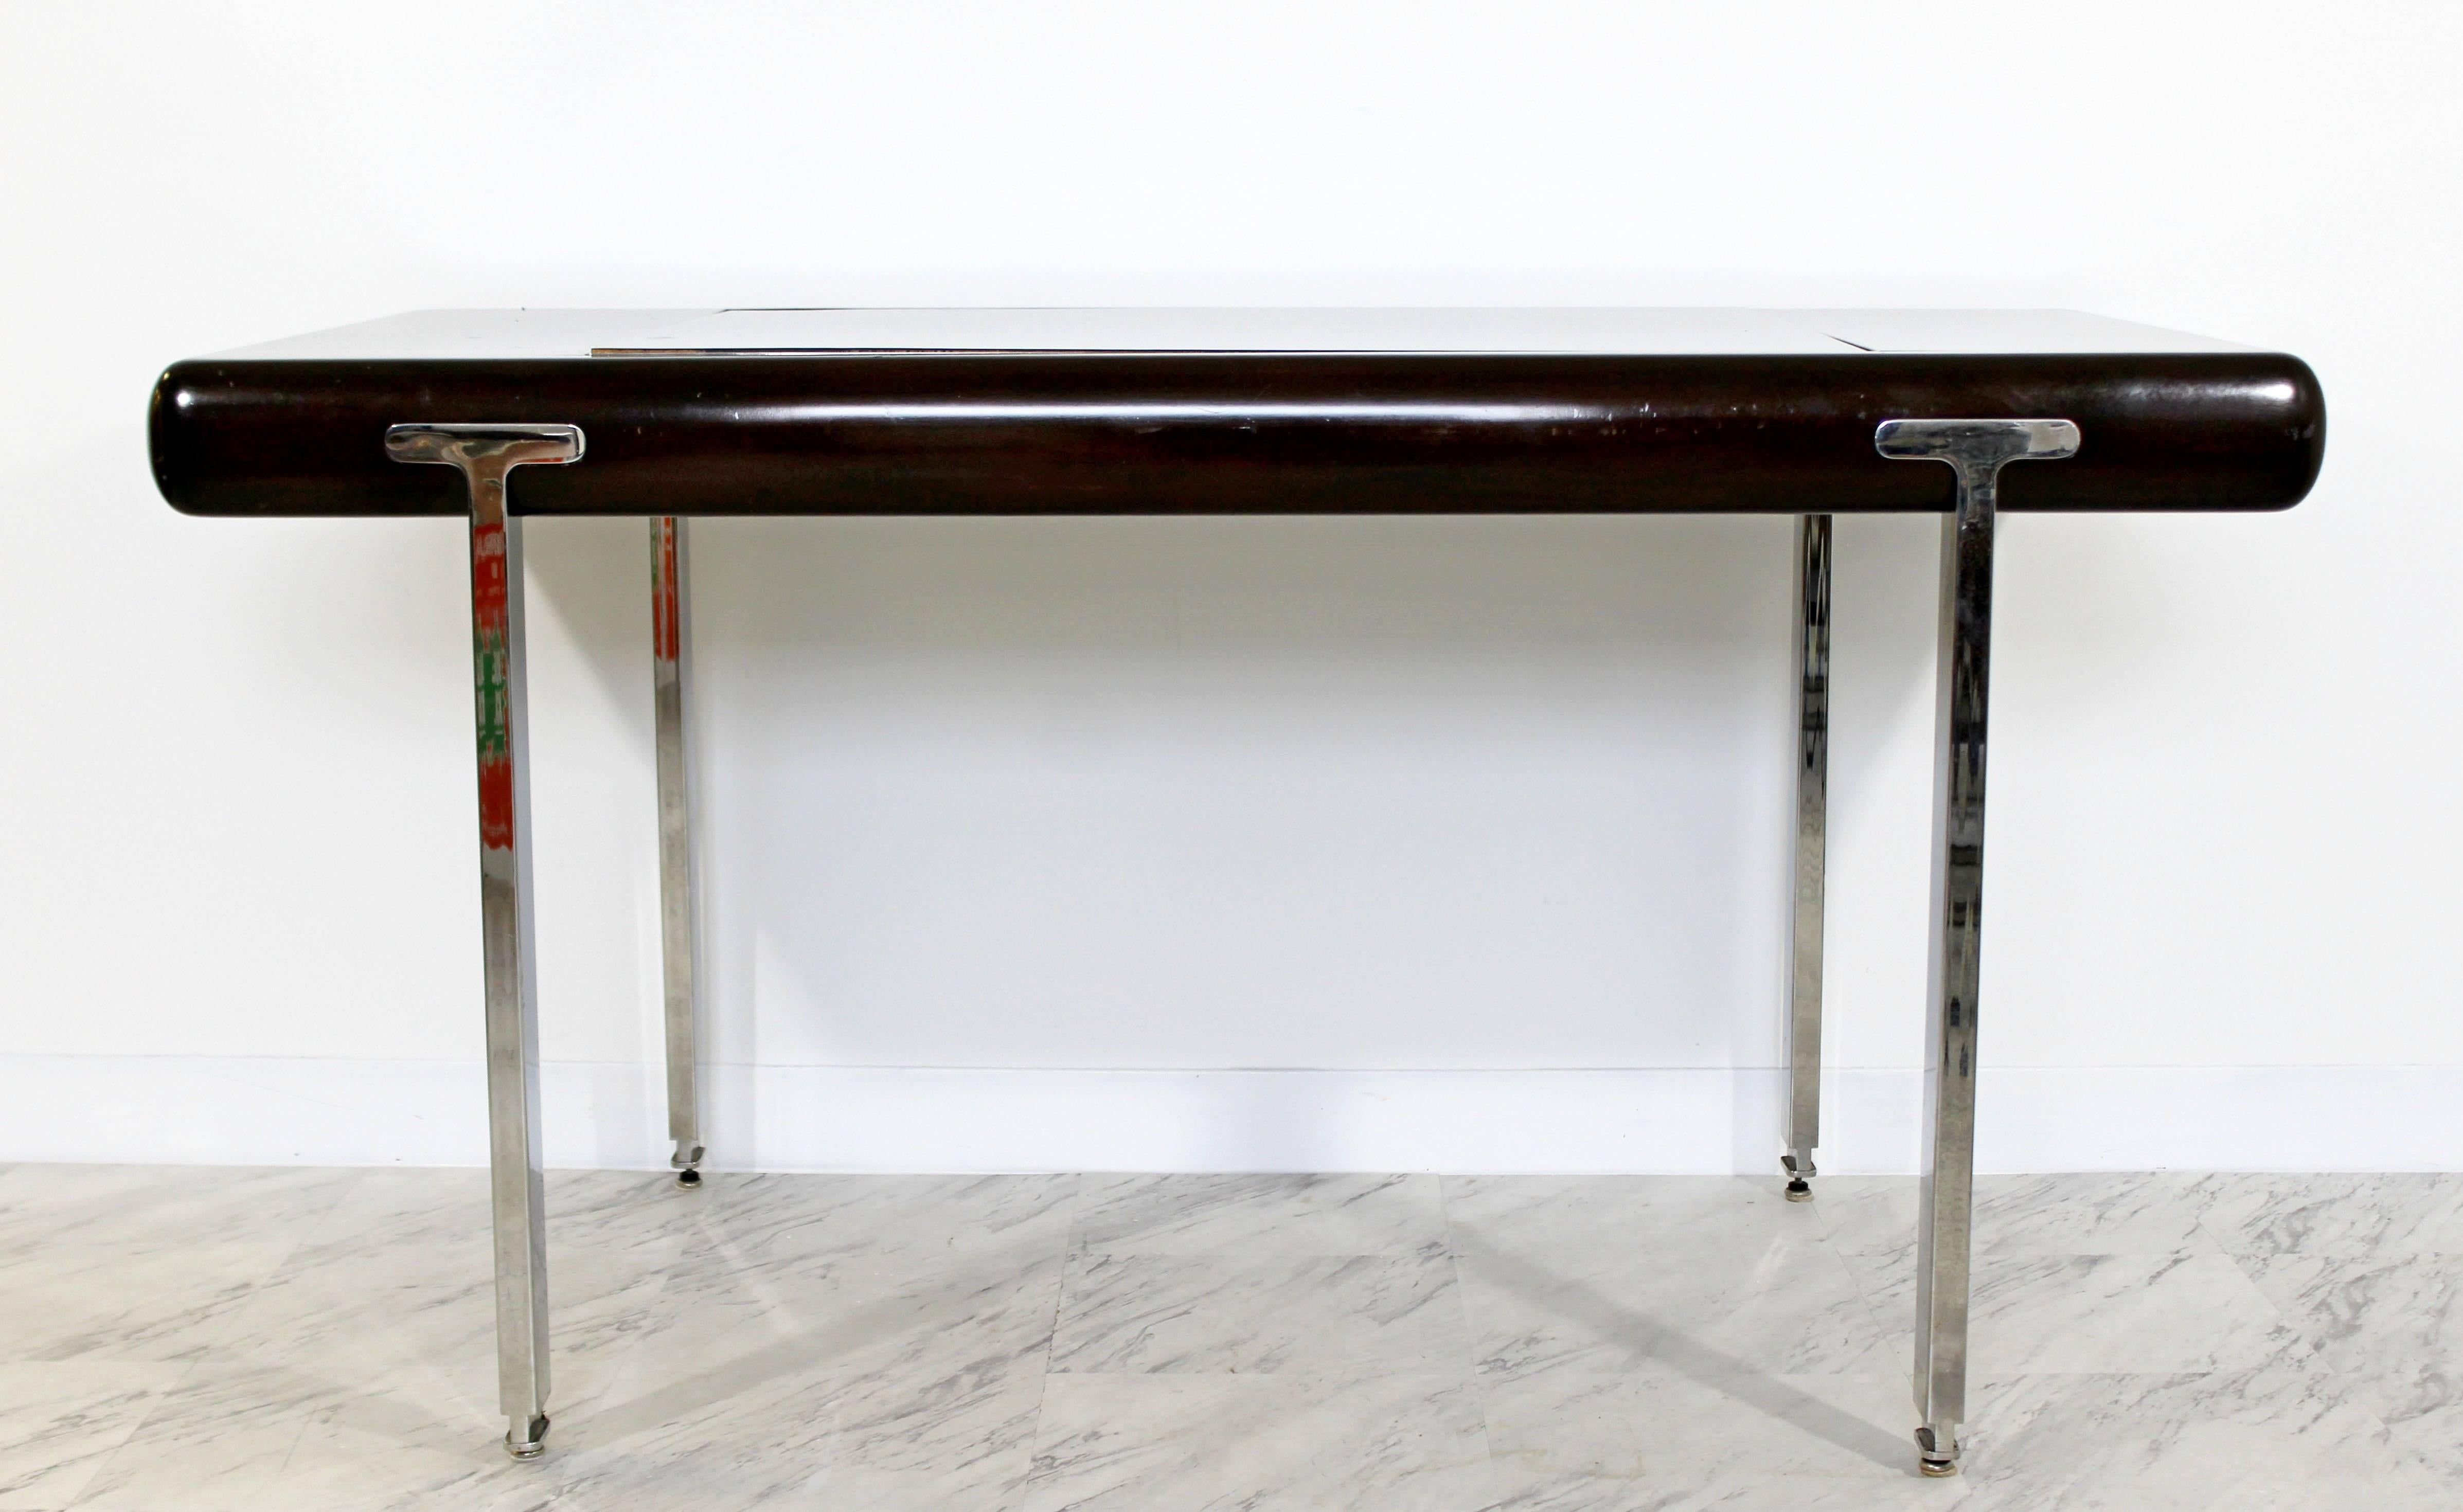 North American Mid-Century Modern Chrome and Wood Desk Backgammon Game Table 1970s Pace Brueton